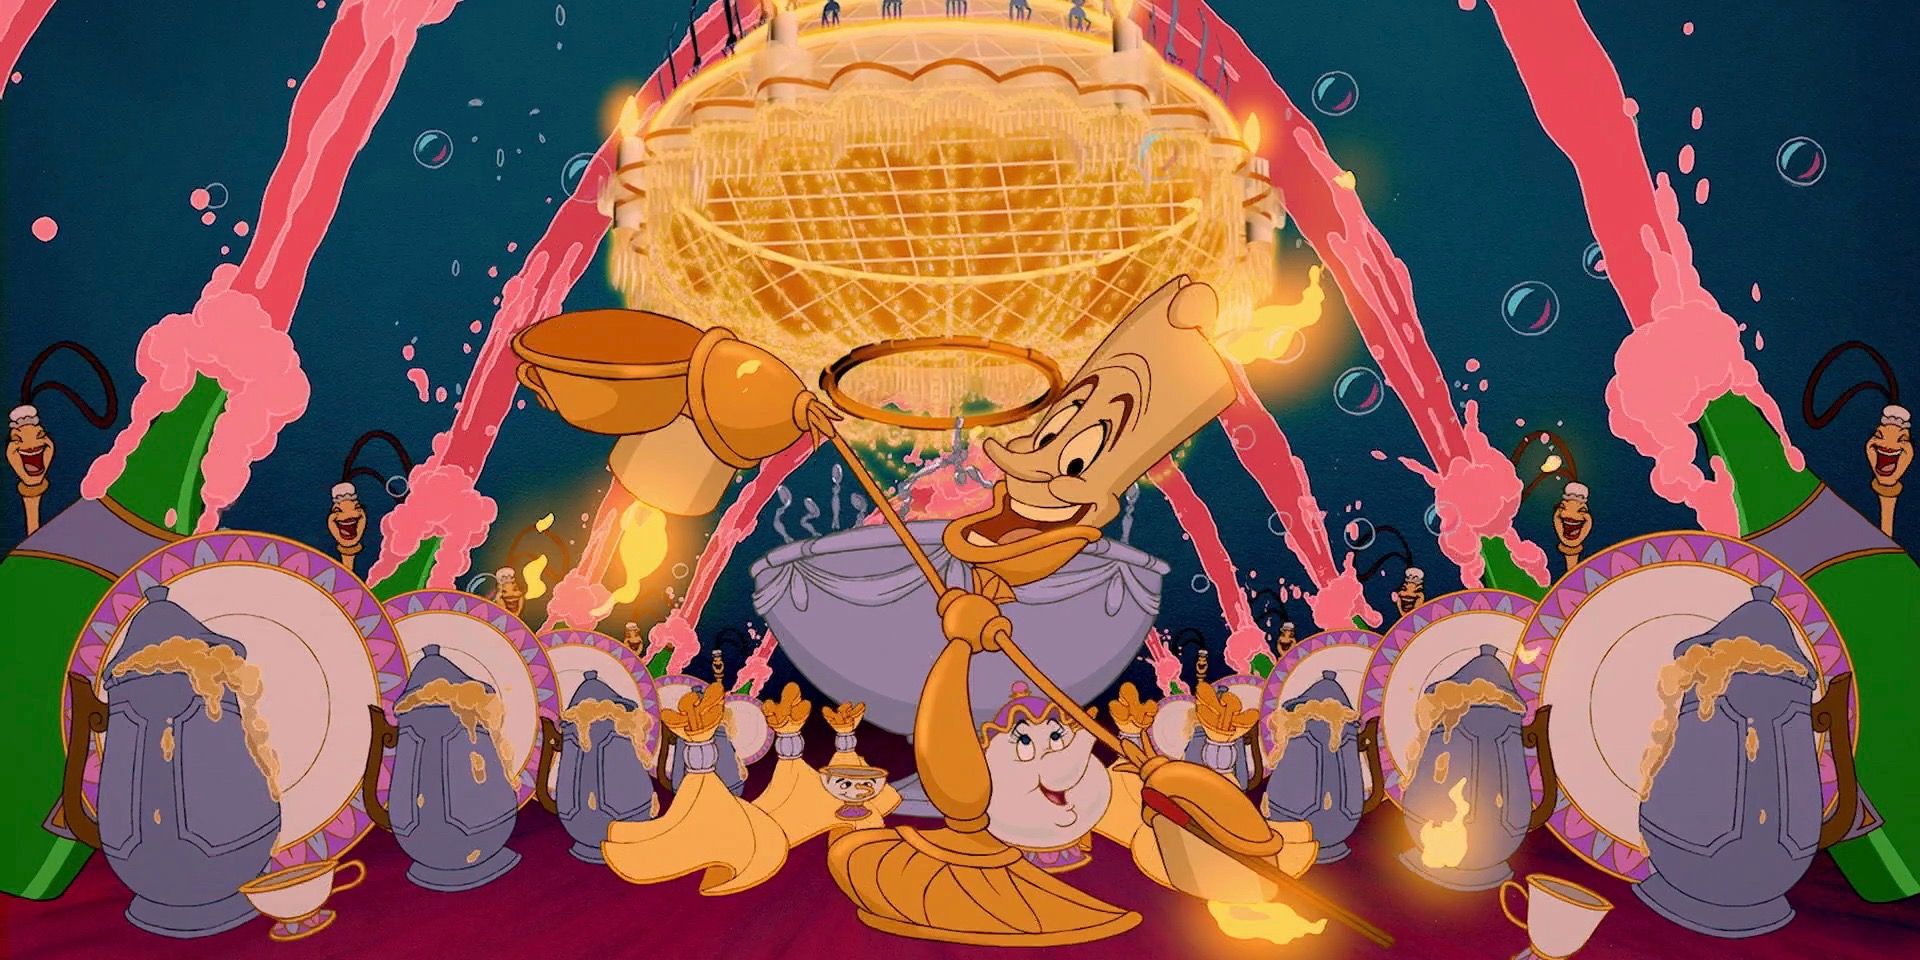 Lumiere in the finale of Be Our Guest from Beauty and the Beast